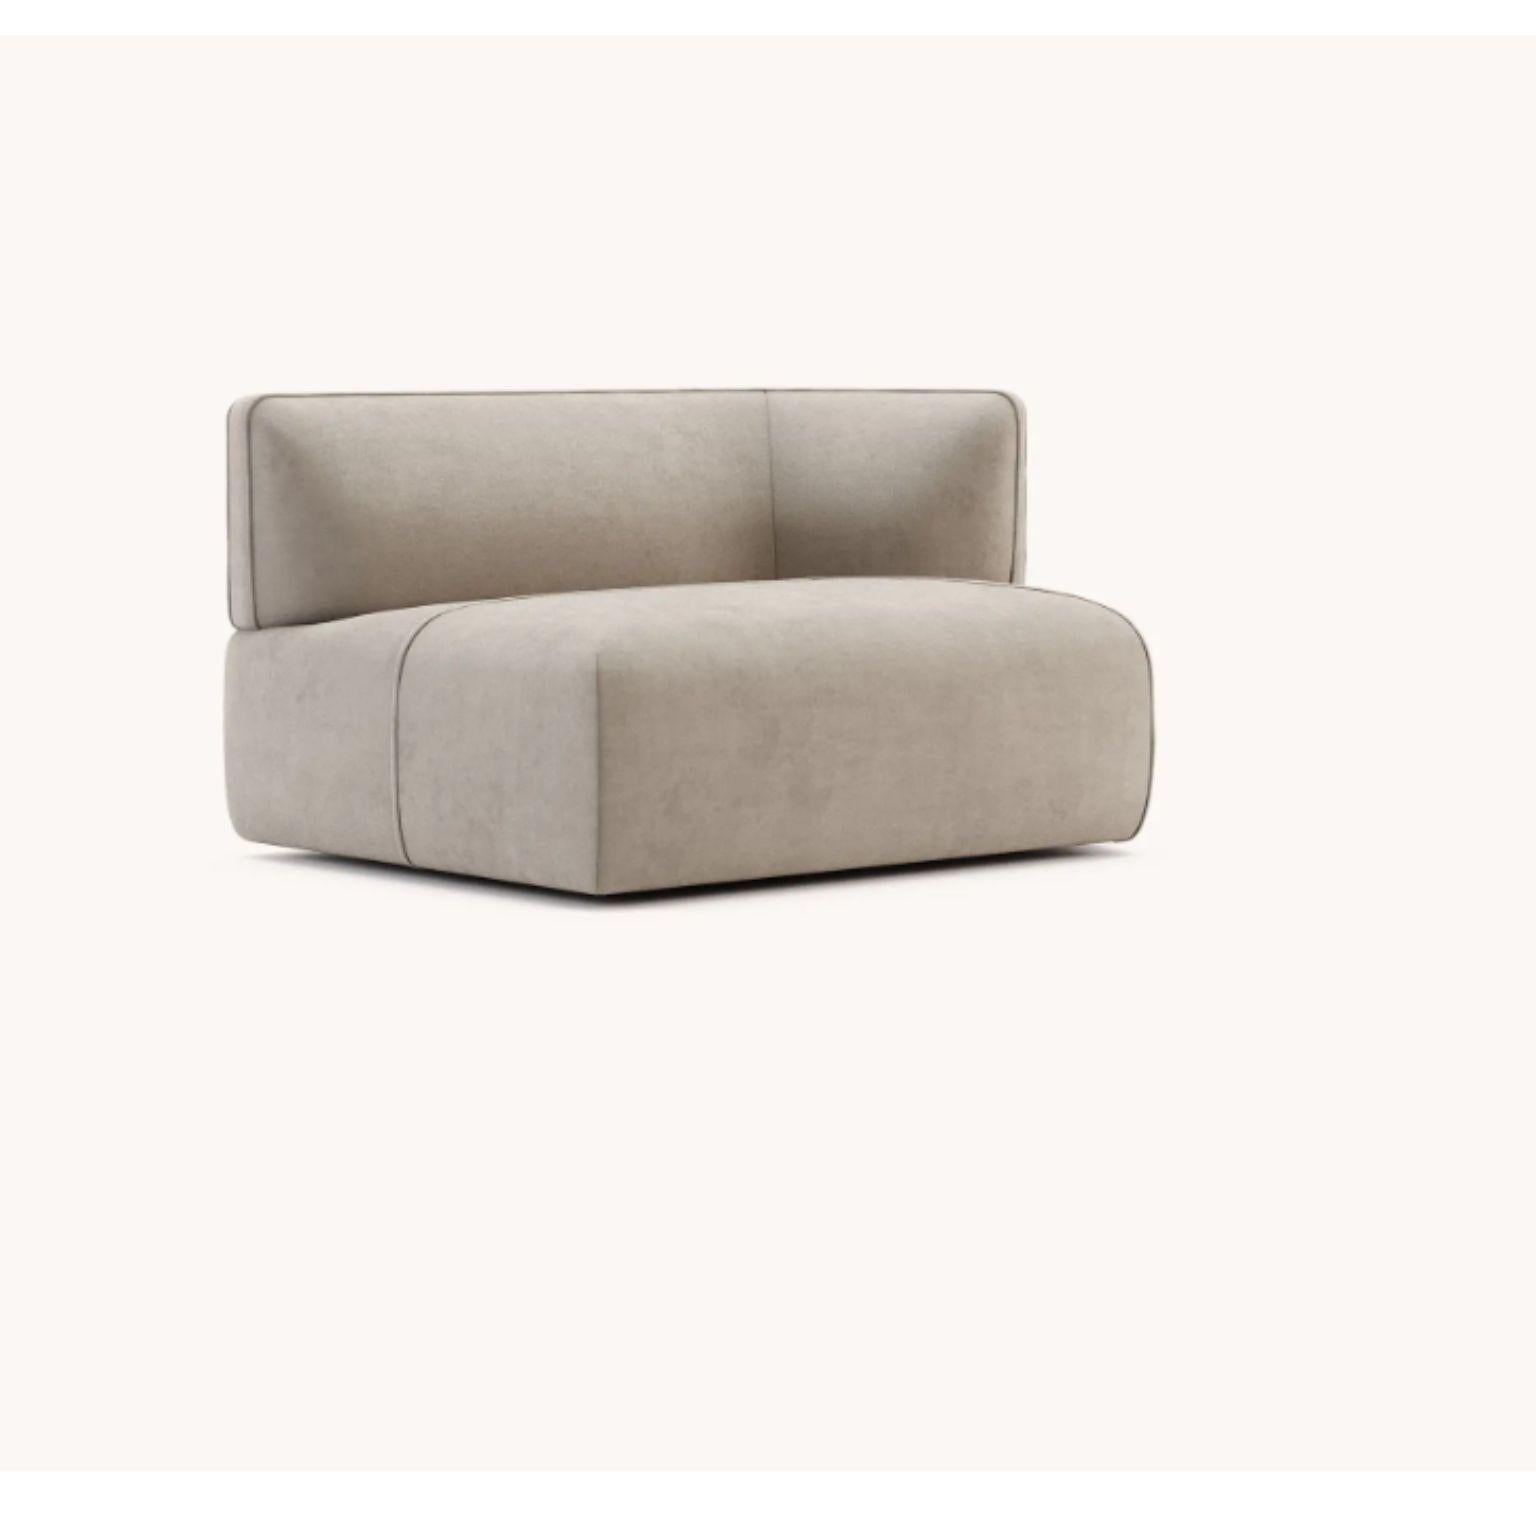 Disruption Module with Armrest Right / Left by Domkapa
Materials: Velvet (Aldan 2928). 
Dimensions: W 144.5 x D 100 x H 80 cm.
Also available in different materials. Please contact us.

Disruption is a modular sofa, fully upholstered, with